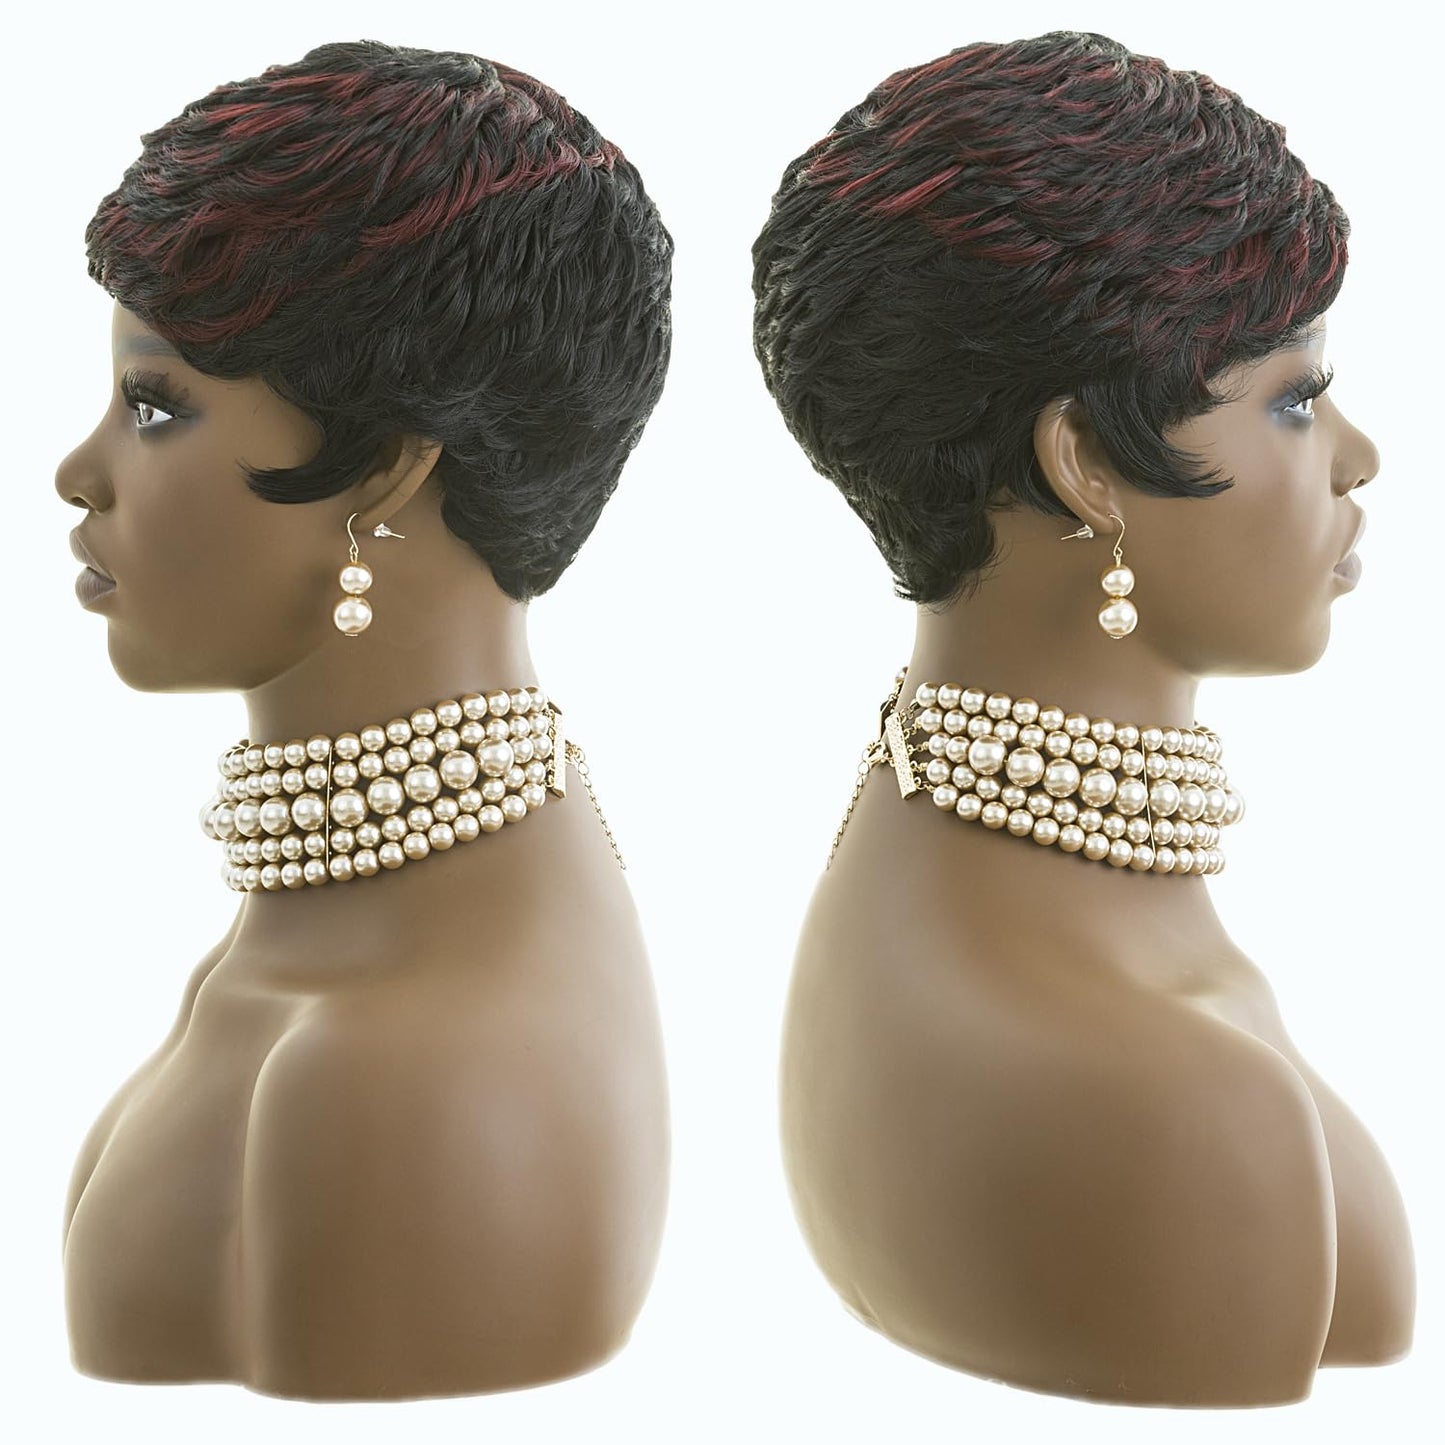 Pixie Cut Wig Short wigs. Natural Wavy Synthetic Hair Wigs Pixie Cut Wig with Bangs Short Curly Layered Pixie Wig for Women